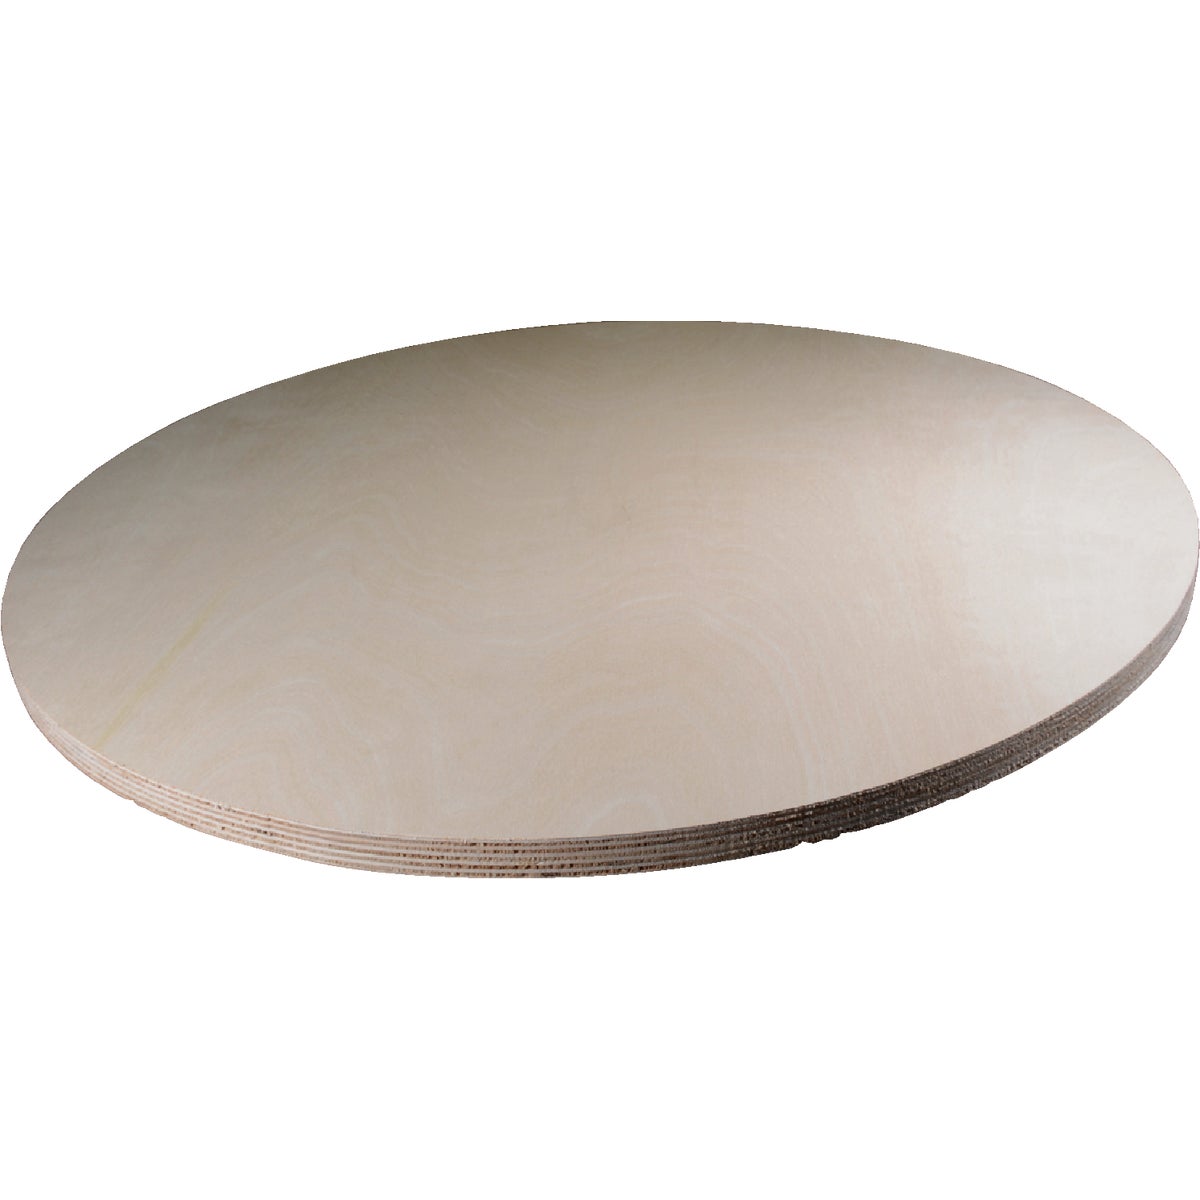 Alexandria Moulding 3/4 In. x 24 In. Plywood Round